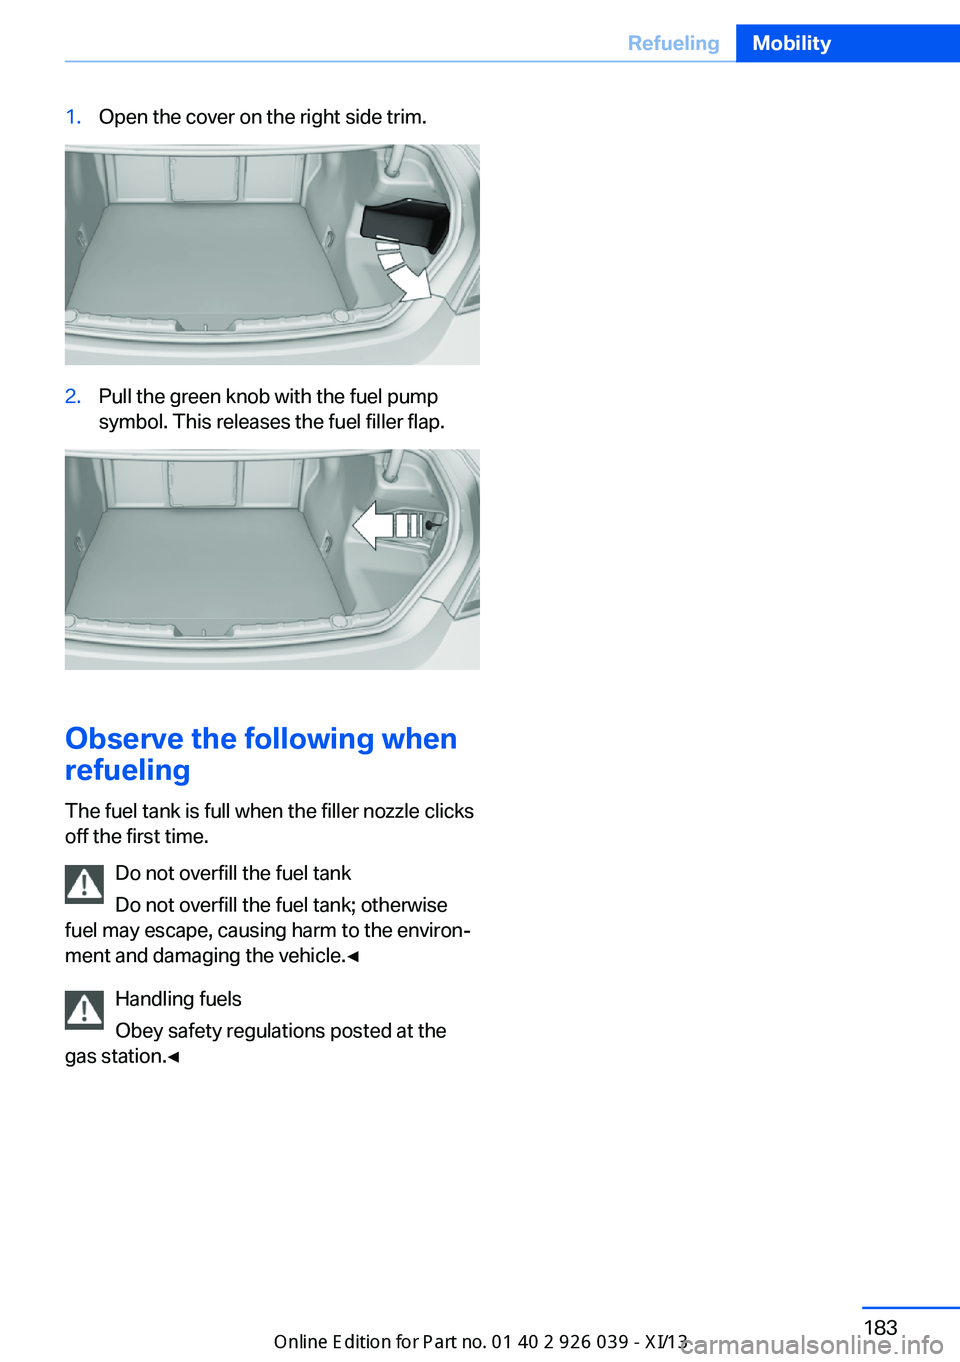 BMW 6 SERIES COUPE 2013 F13 Owners Manual 1.Open the cover on the right side trim.2.Pull the green knob with the fuel pump
symbol. This releases the fuel filler flap.
Observe the following when
refueling
The fuel tank is full when the filler 